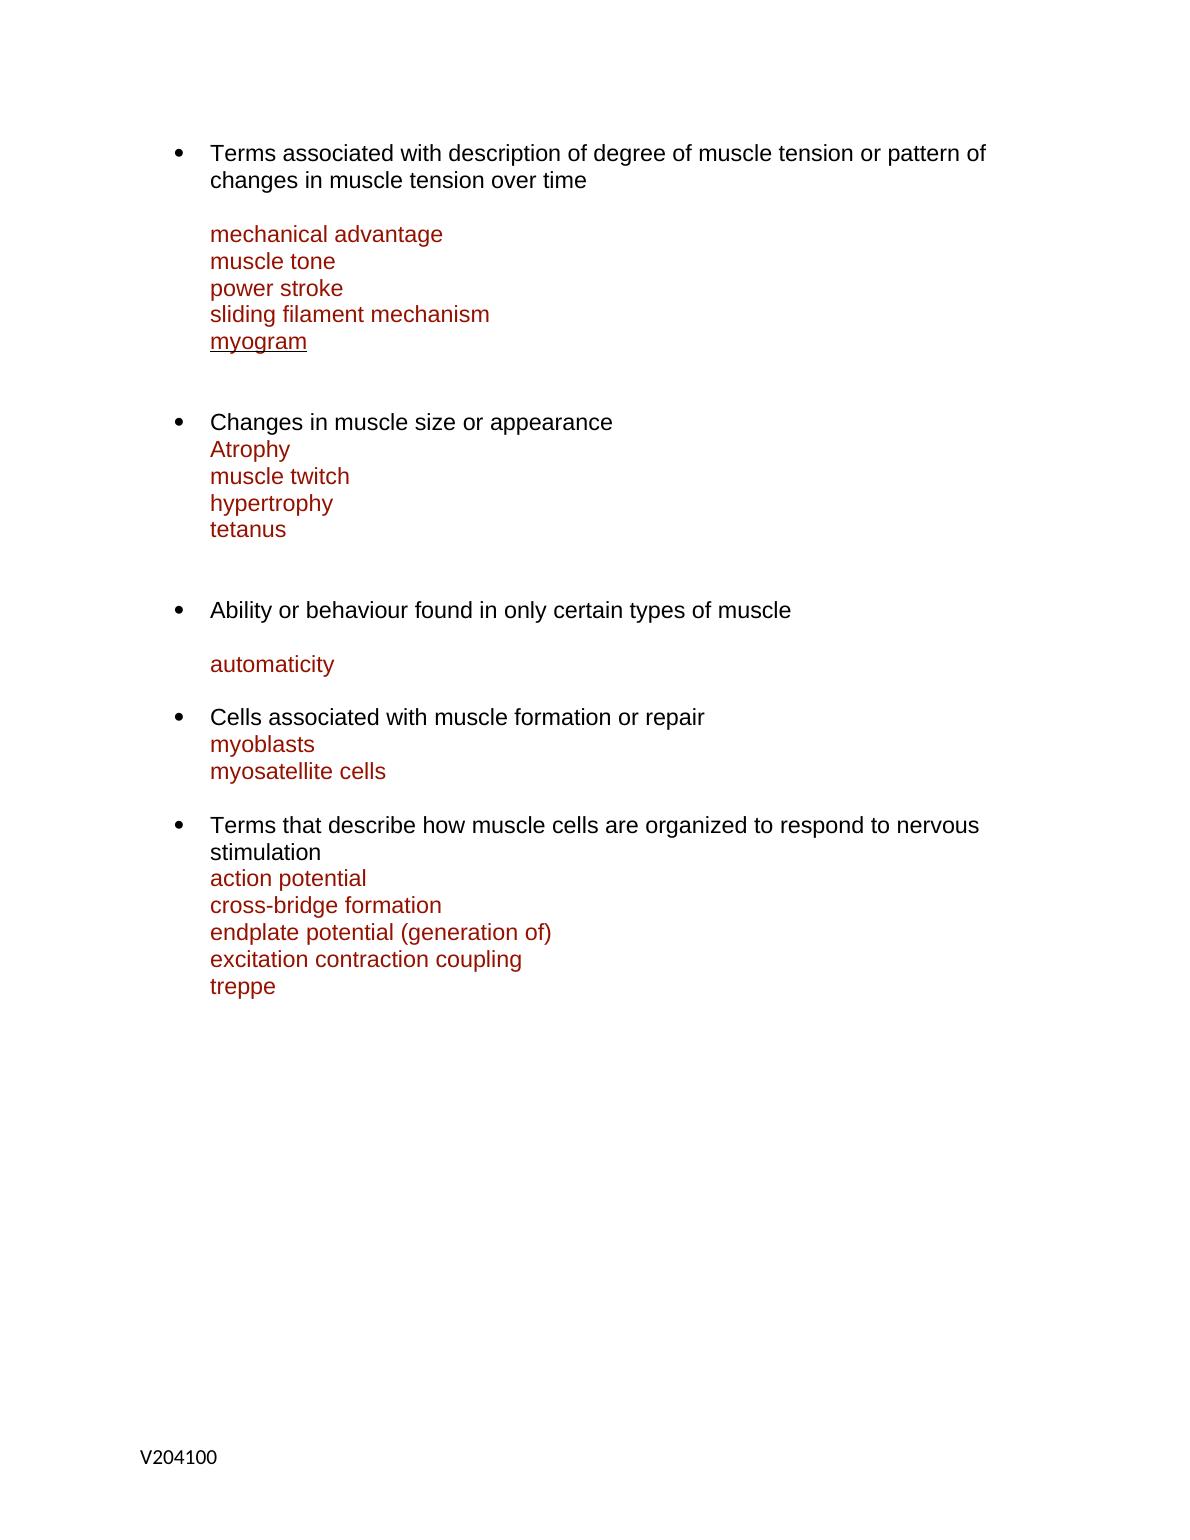 Final Assignment 2: List of Categories for Chapters 9 and 10 | Doc_3